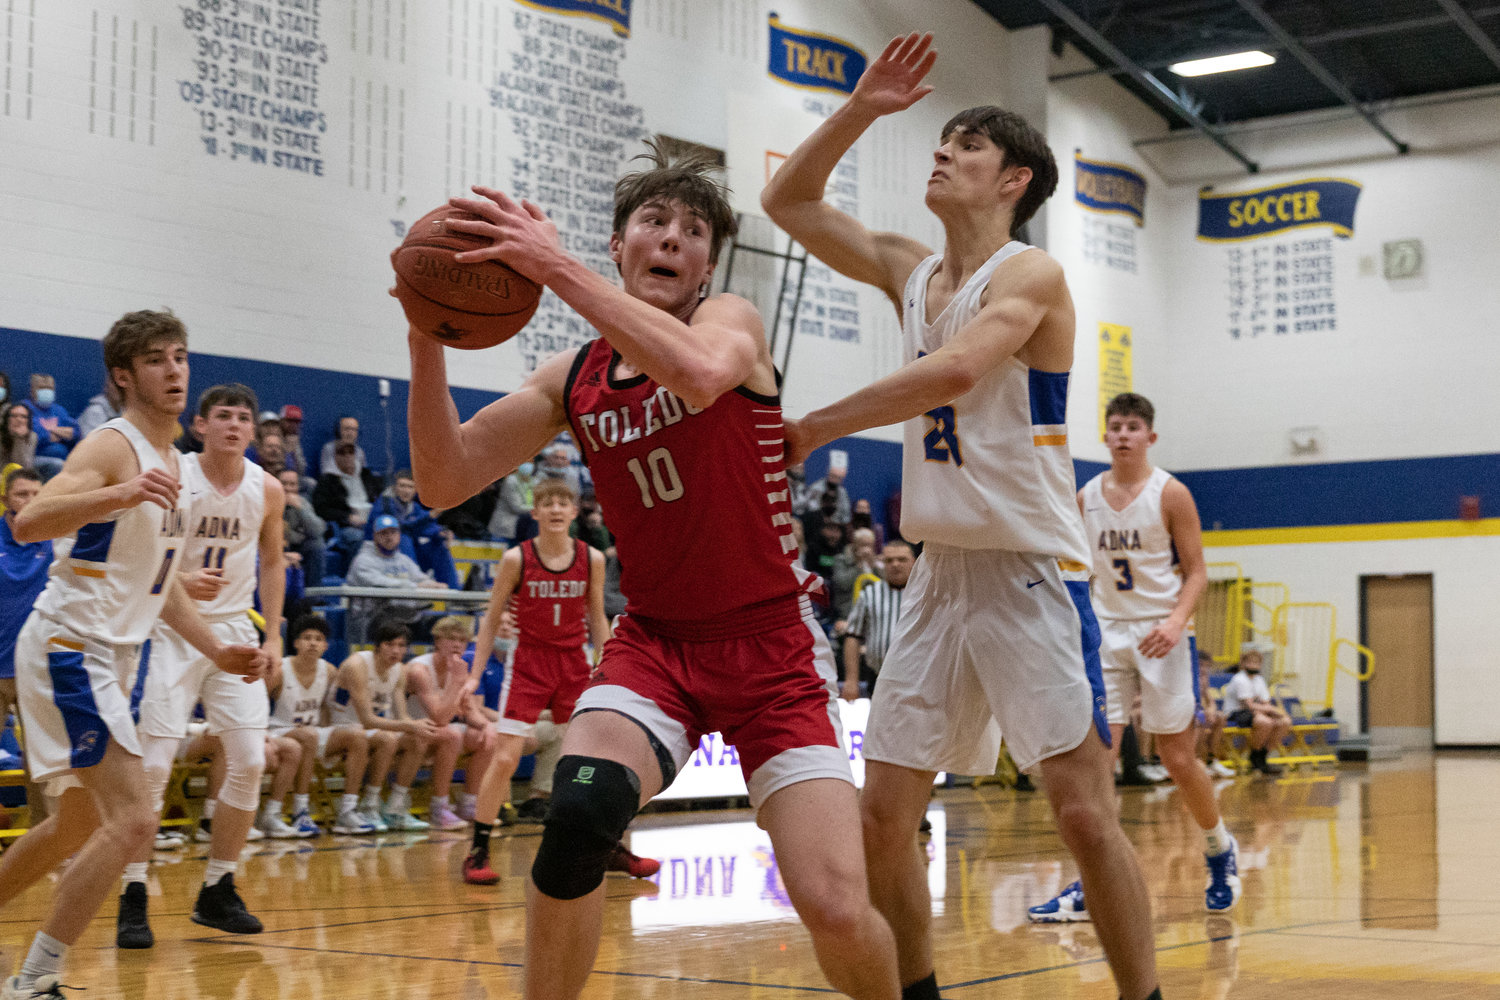 Toledo forward Carson Olmstead looks to score in the low post against Adna Jan. 21.